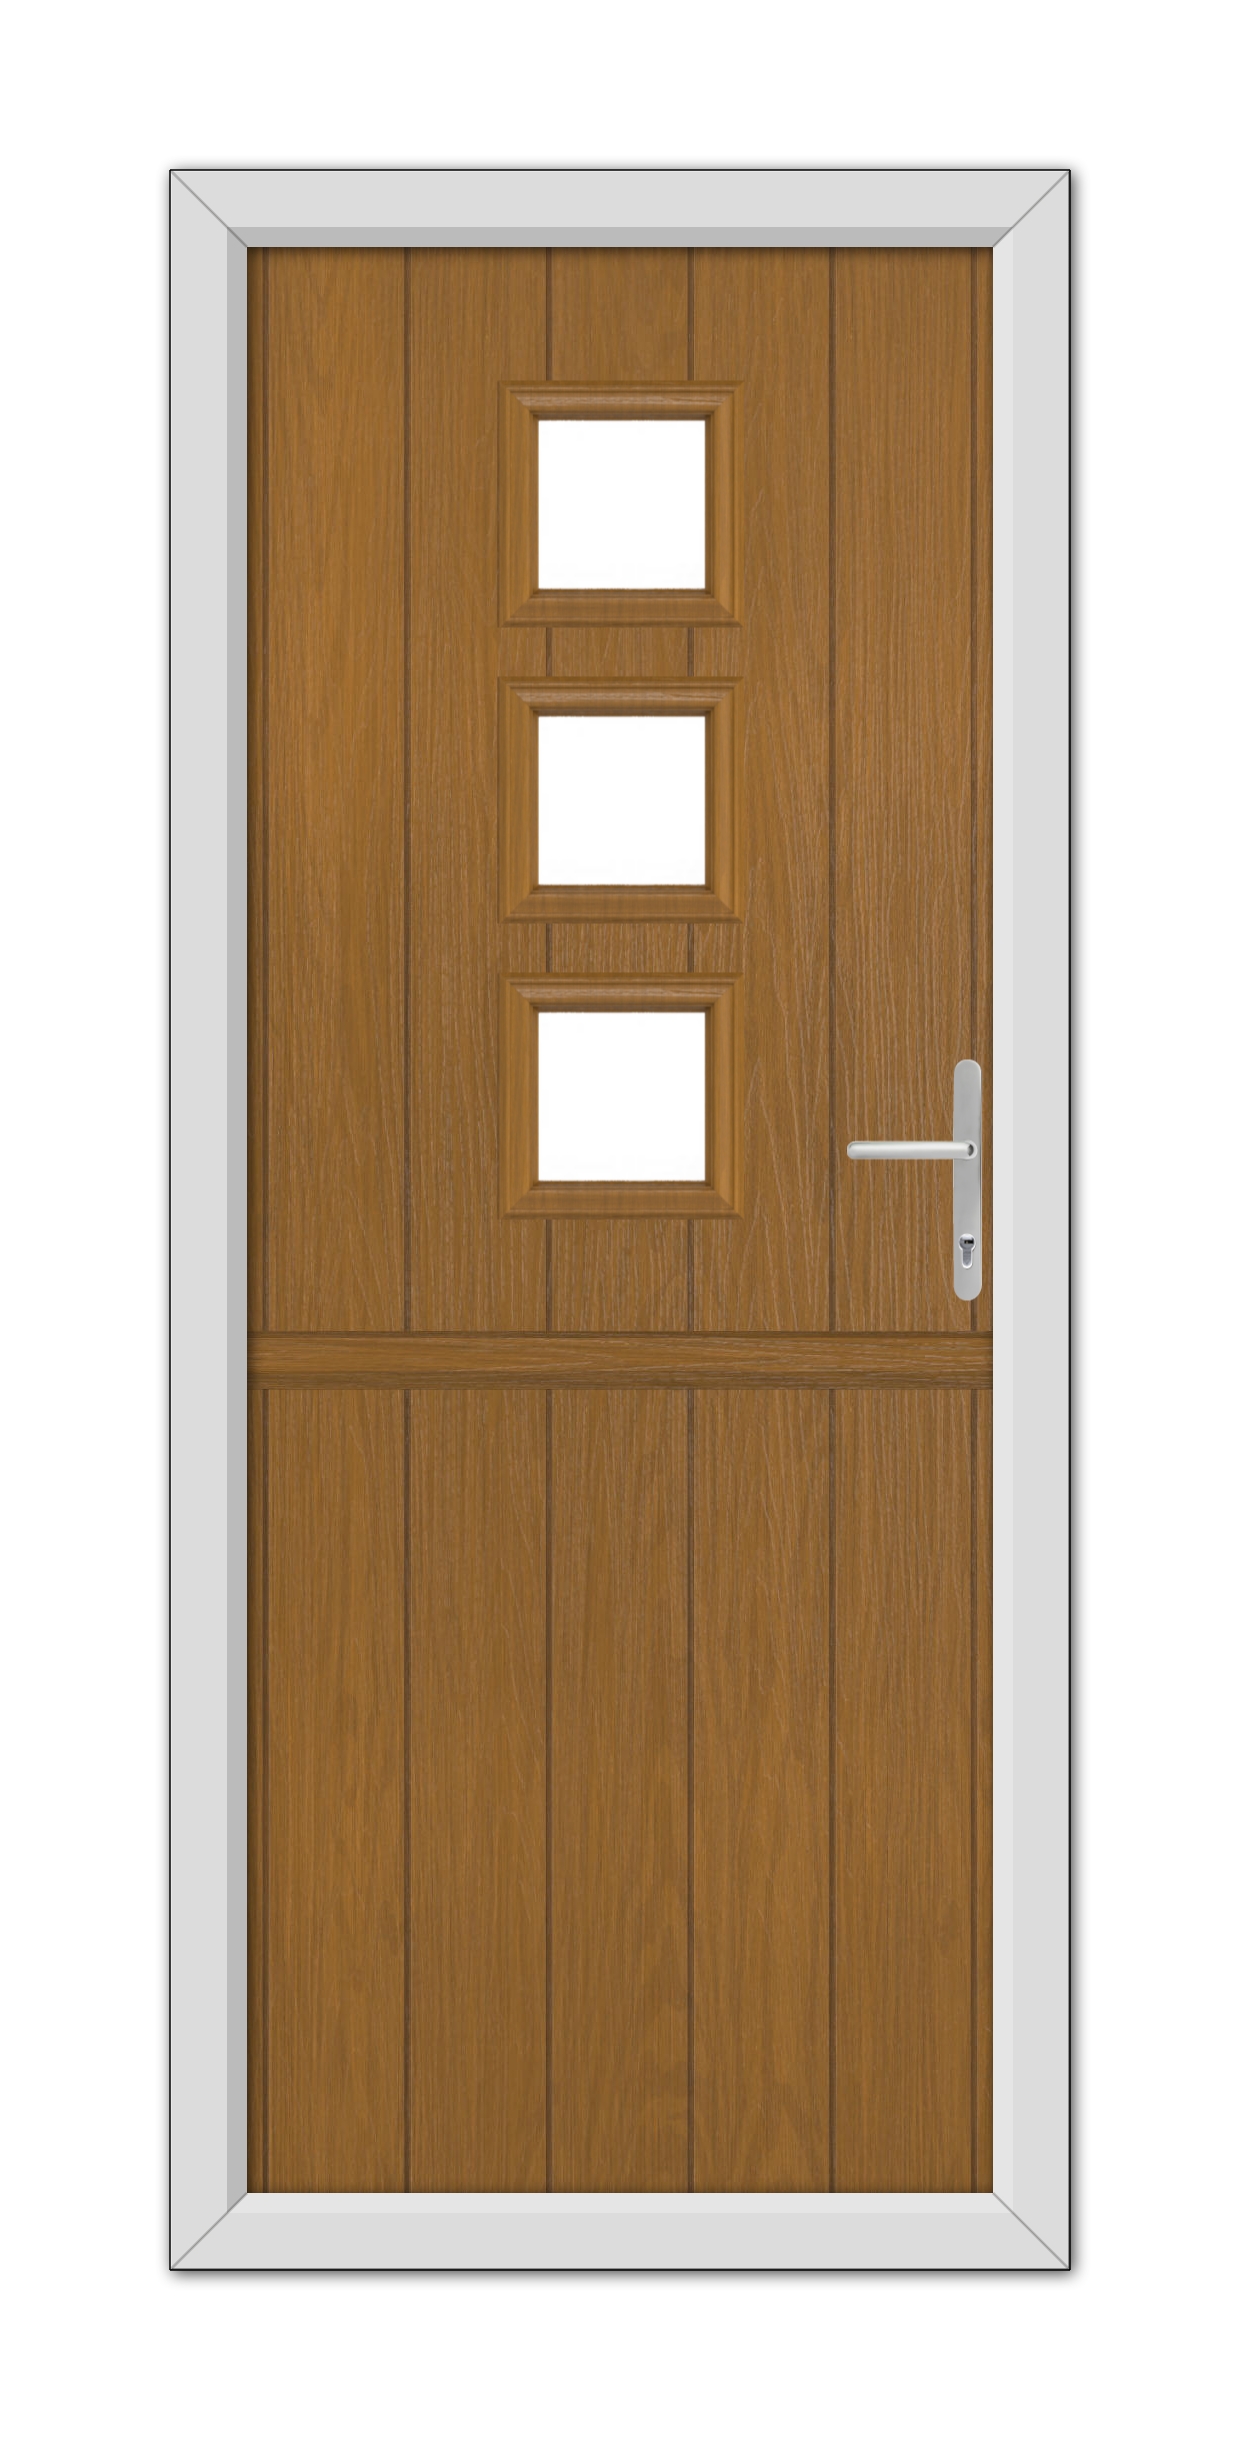 A modern Oak Montrose Stable Composite Door 48mm Timber Core with three small rectangular windows, framed in white, featuring a metal handle on the right side.